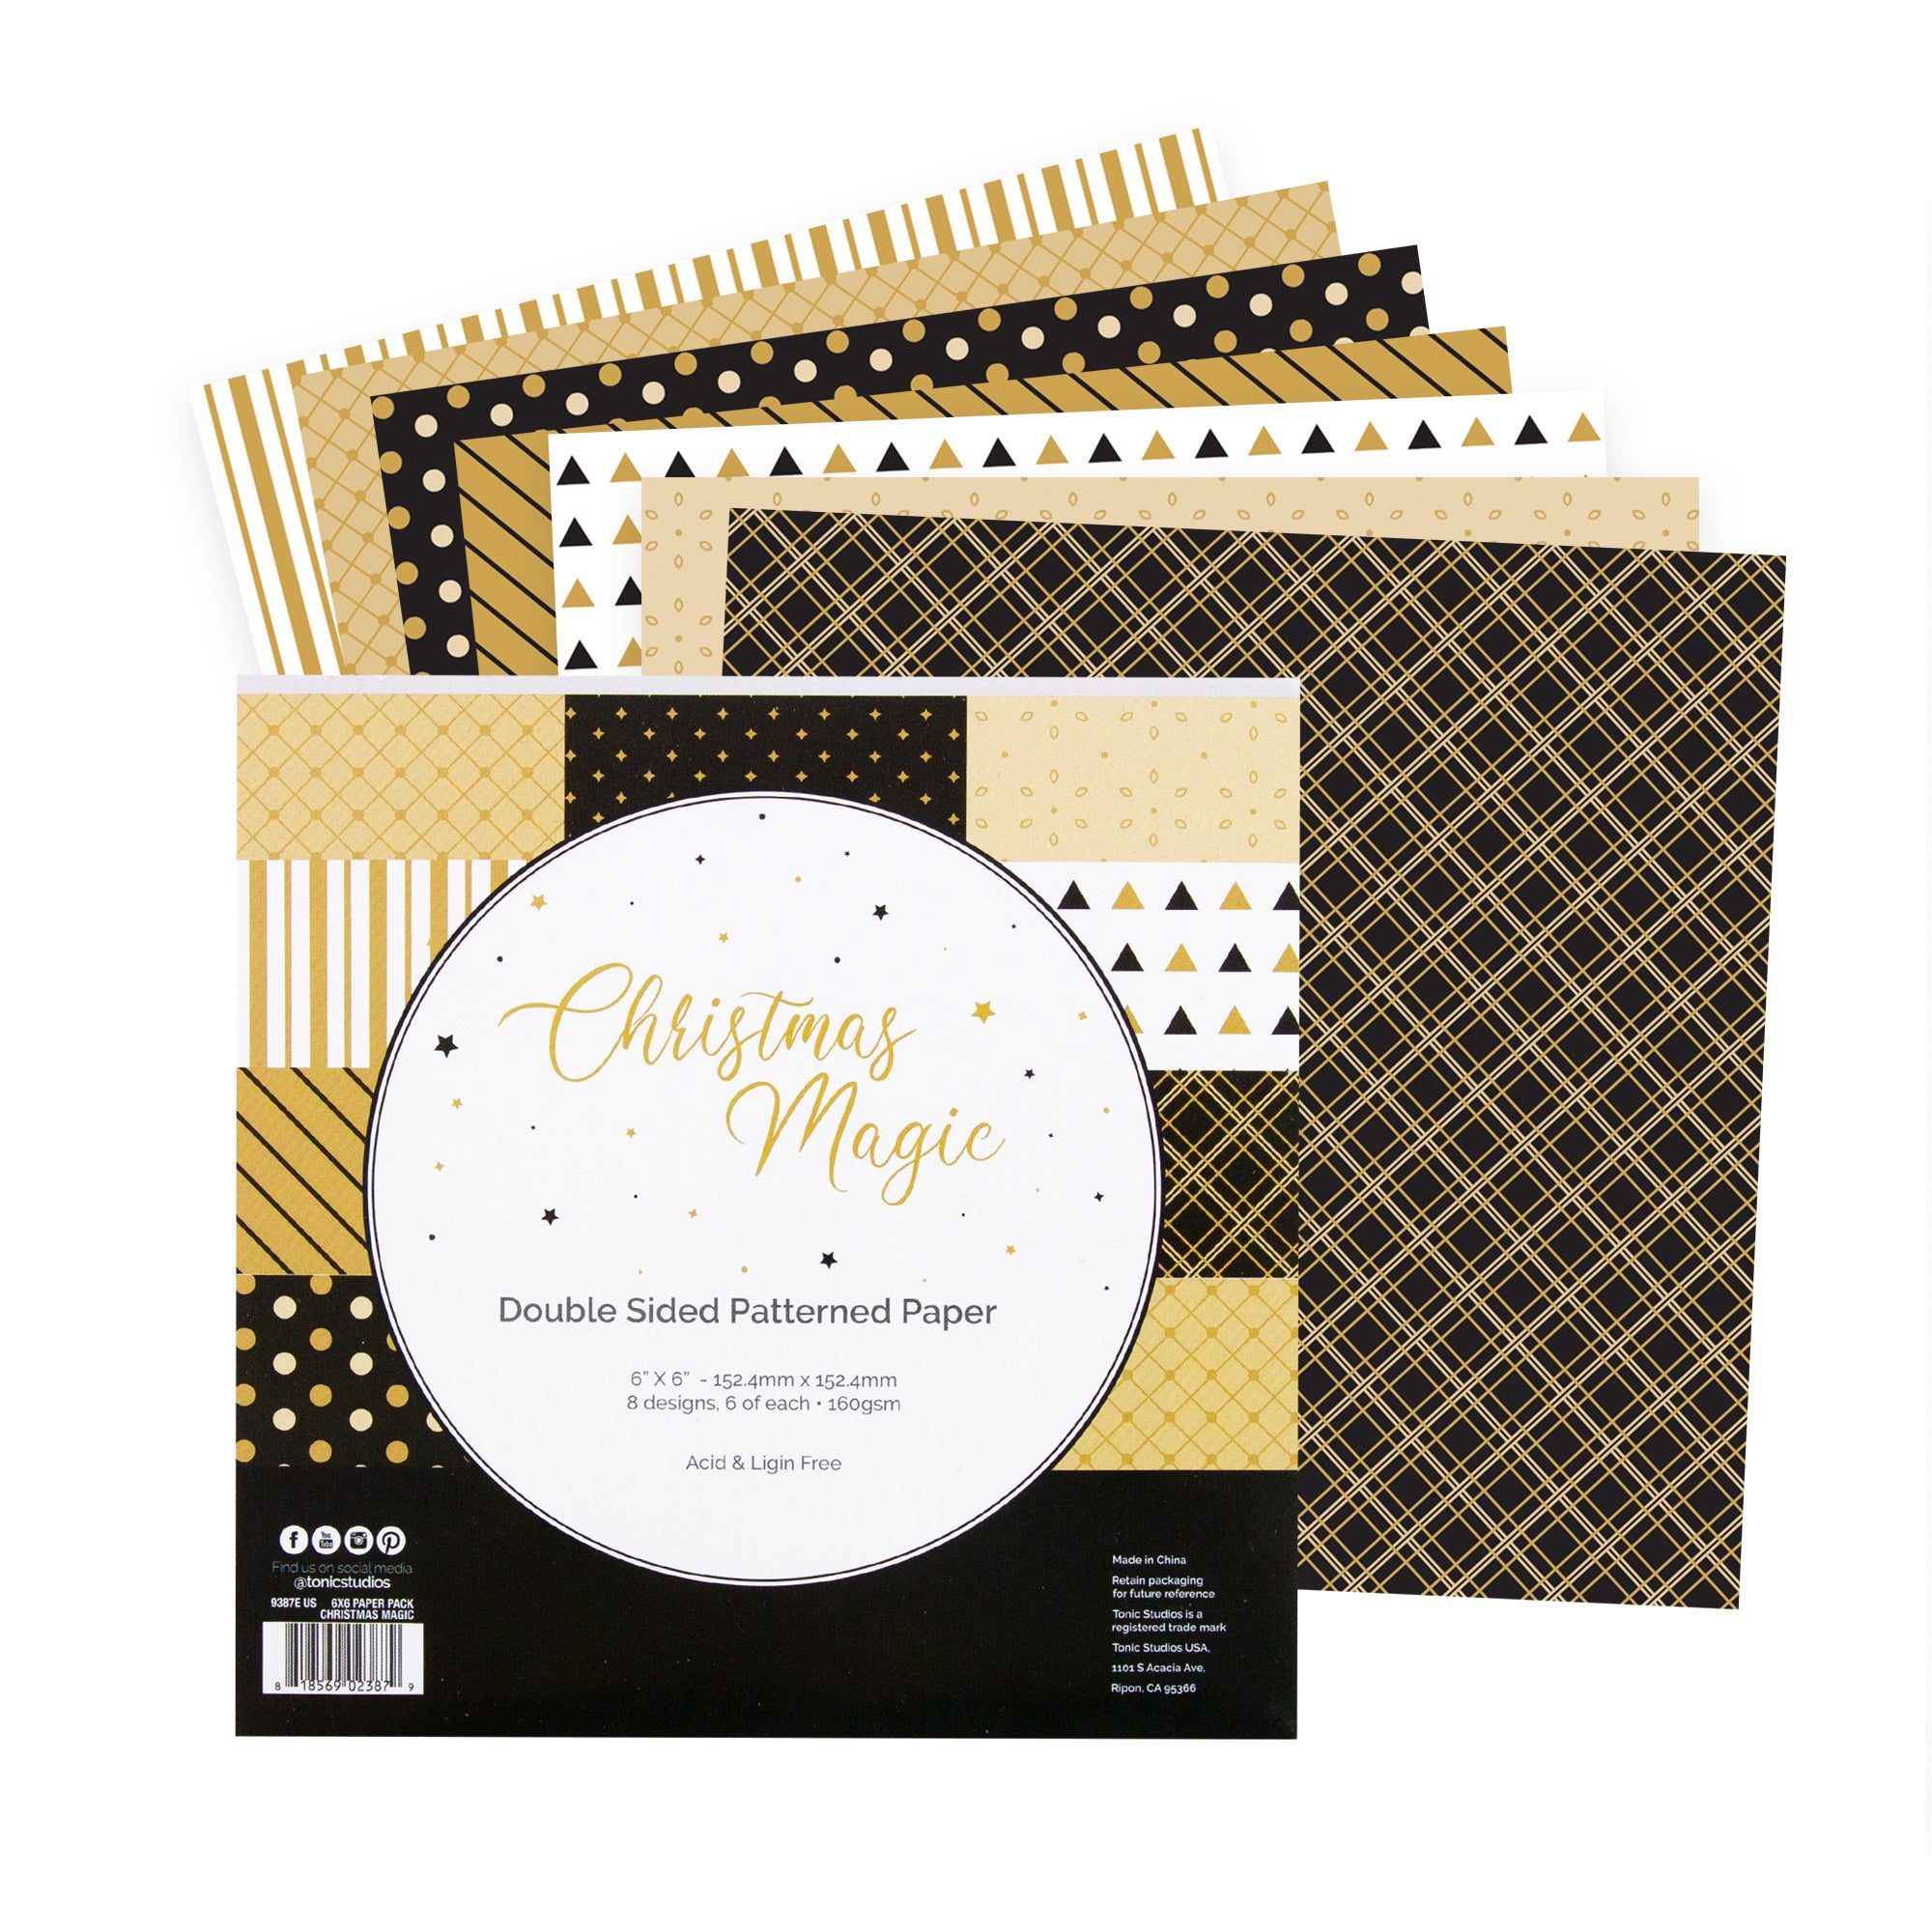 6x6 Card Pack with Gold Mirror Card Stock and Black Card Stock